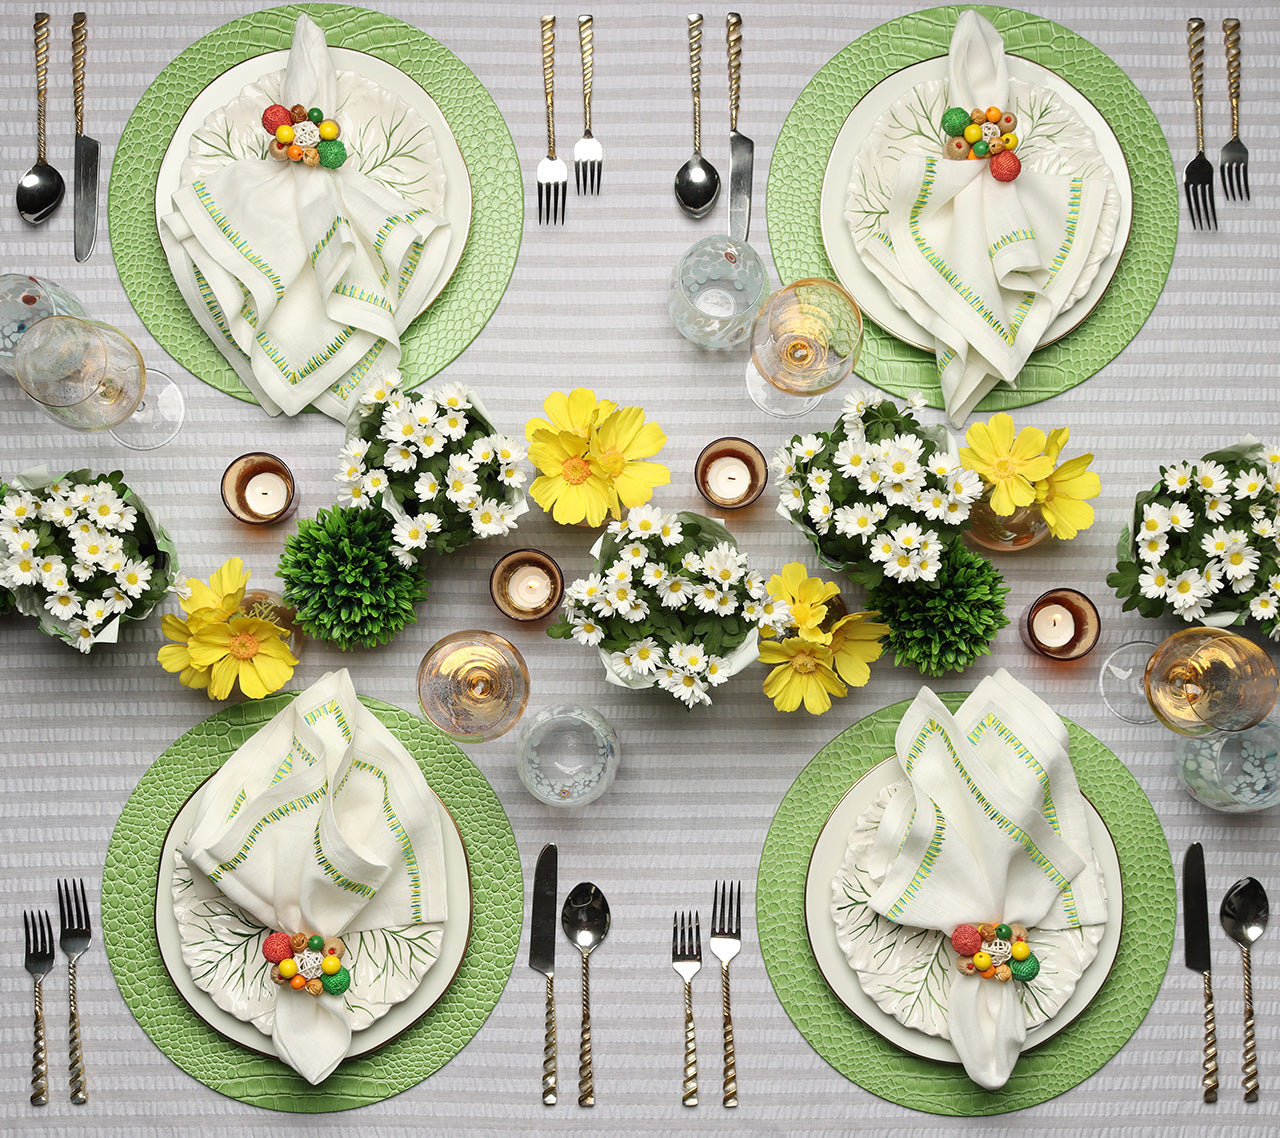 Overhead view of a table with four place settings featuring placemats and Kim Seybert Luxury Filament Napkin in white, yellow & green 